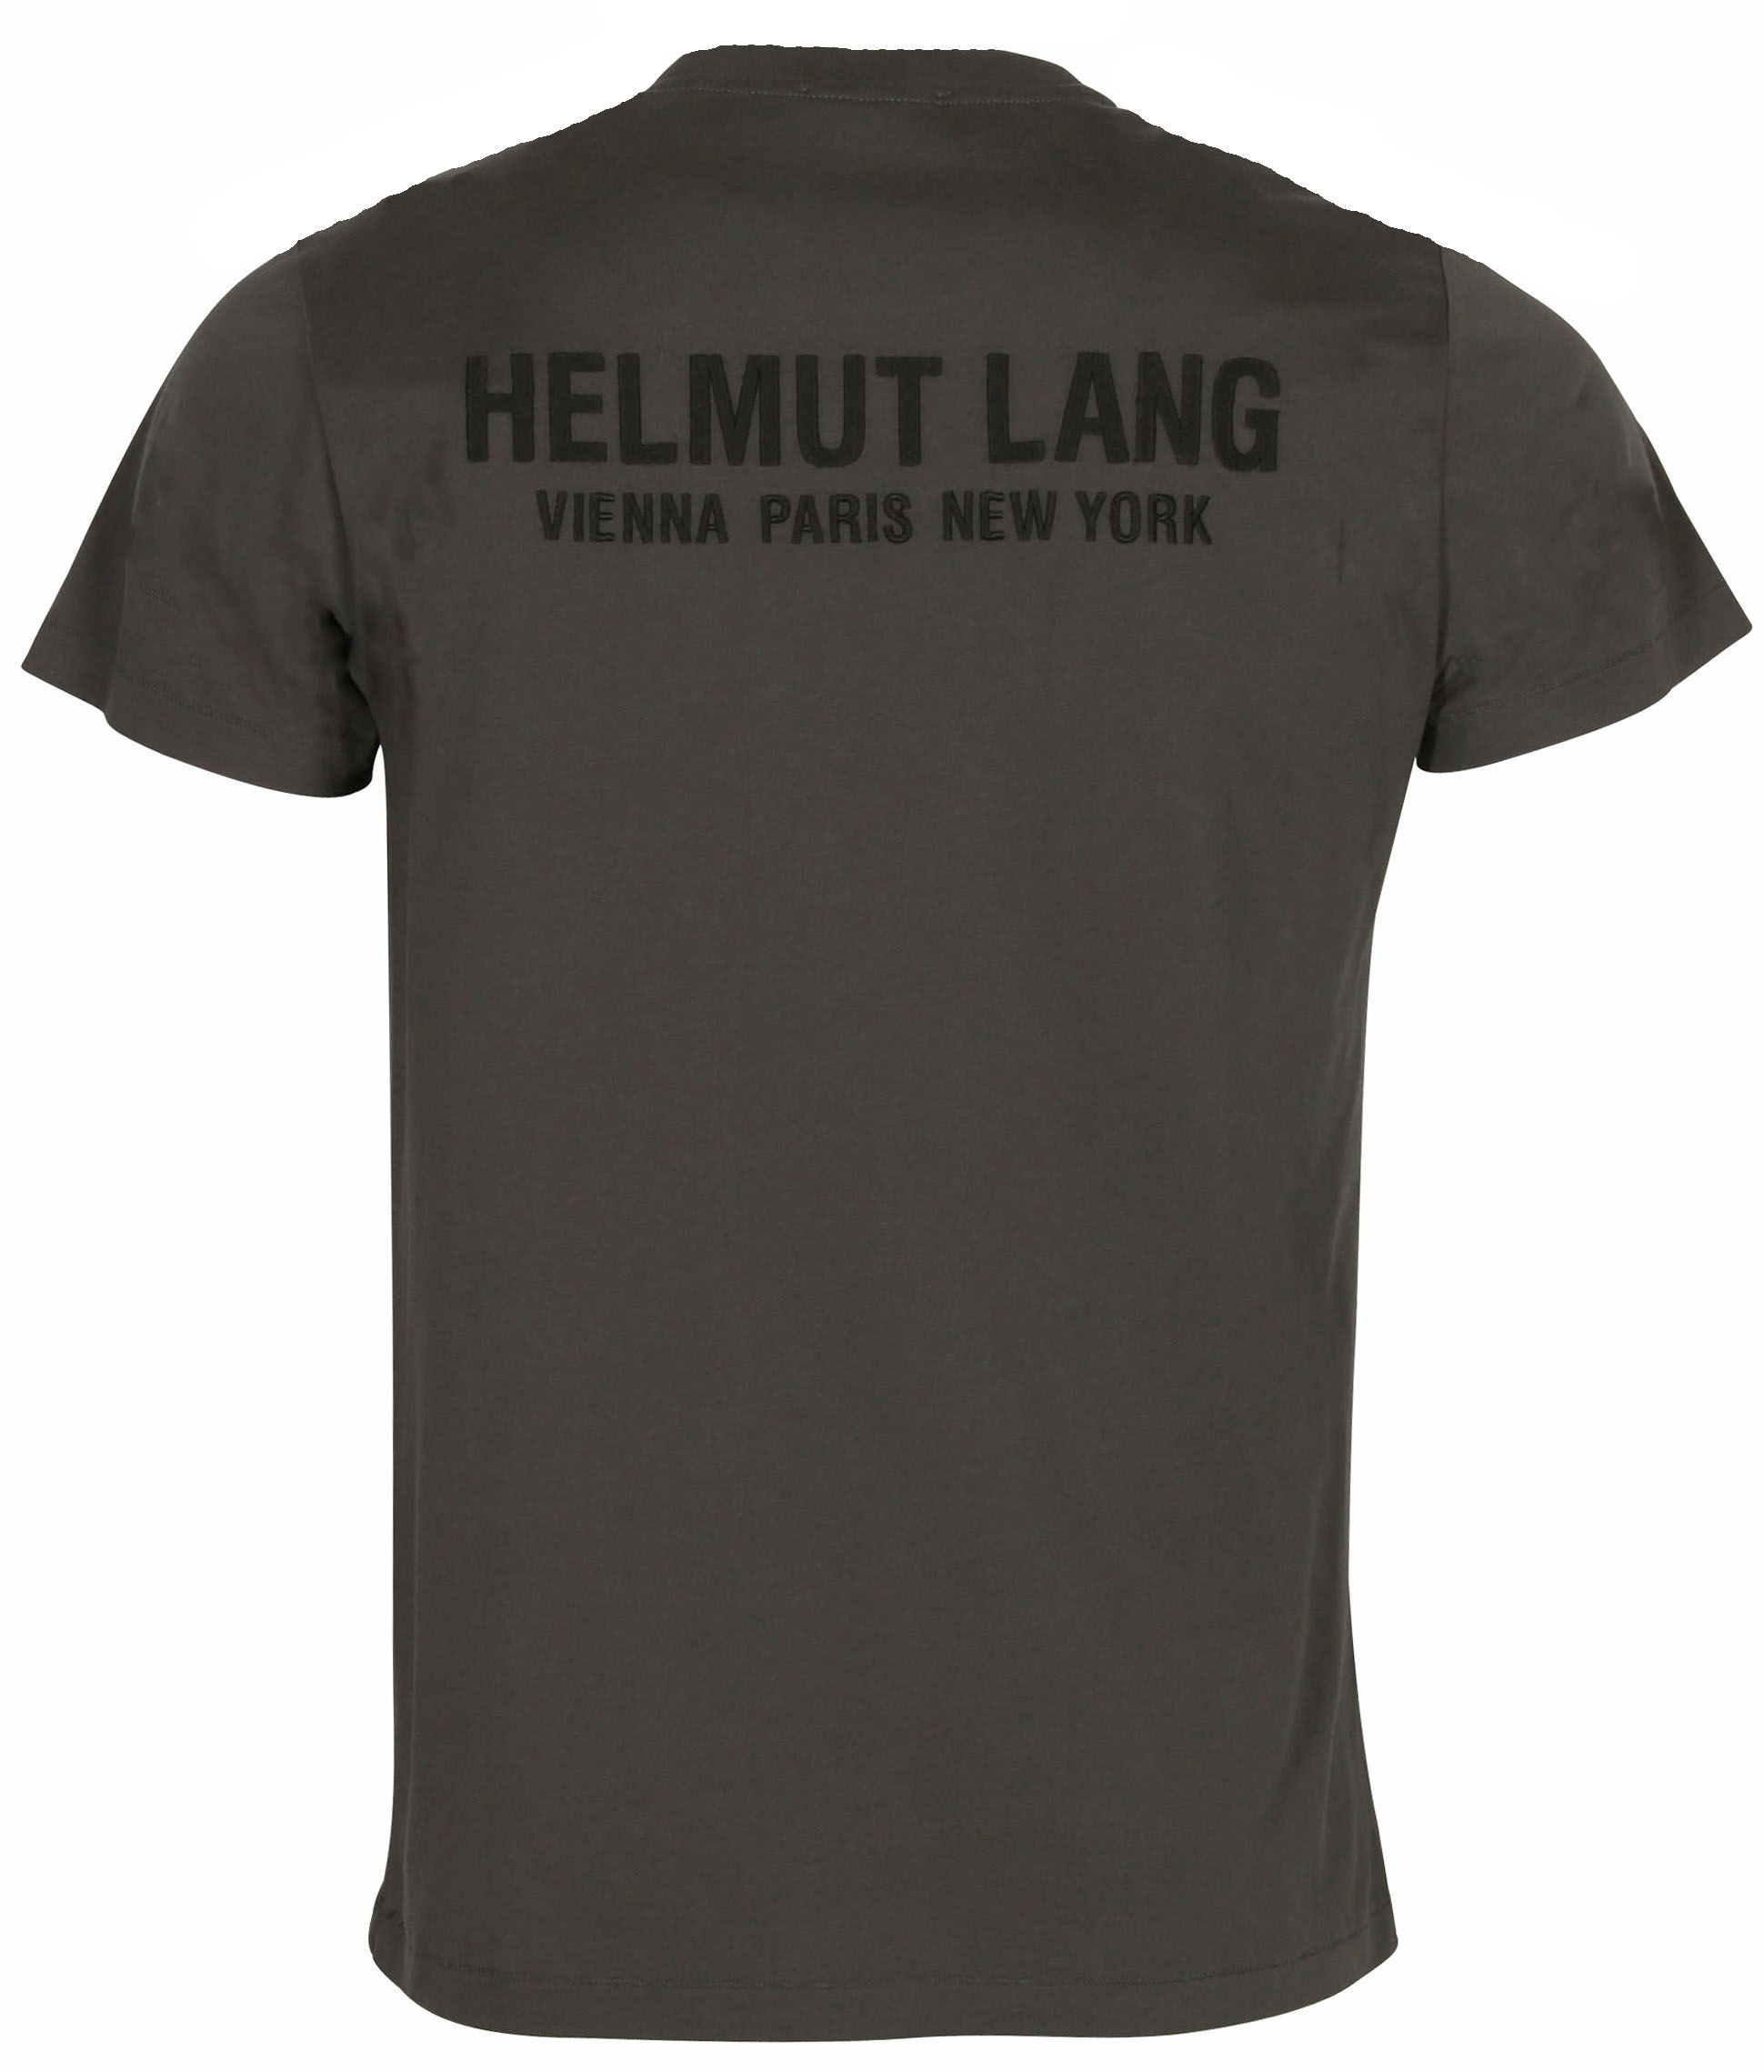 Helmut Lang T-Shirt Grey Printed Embroidered S